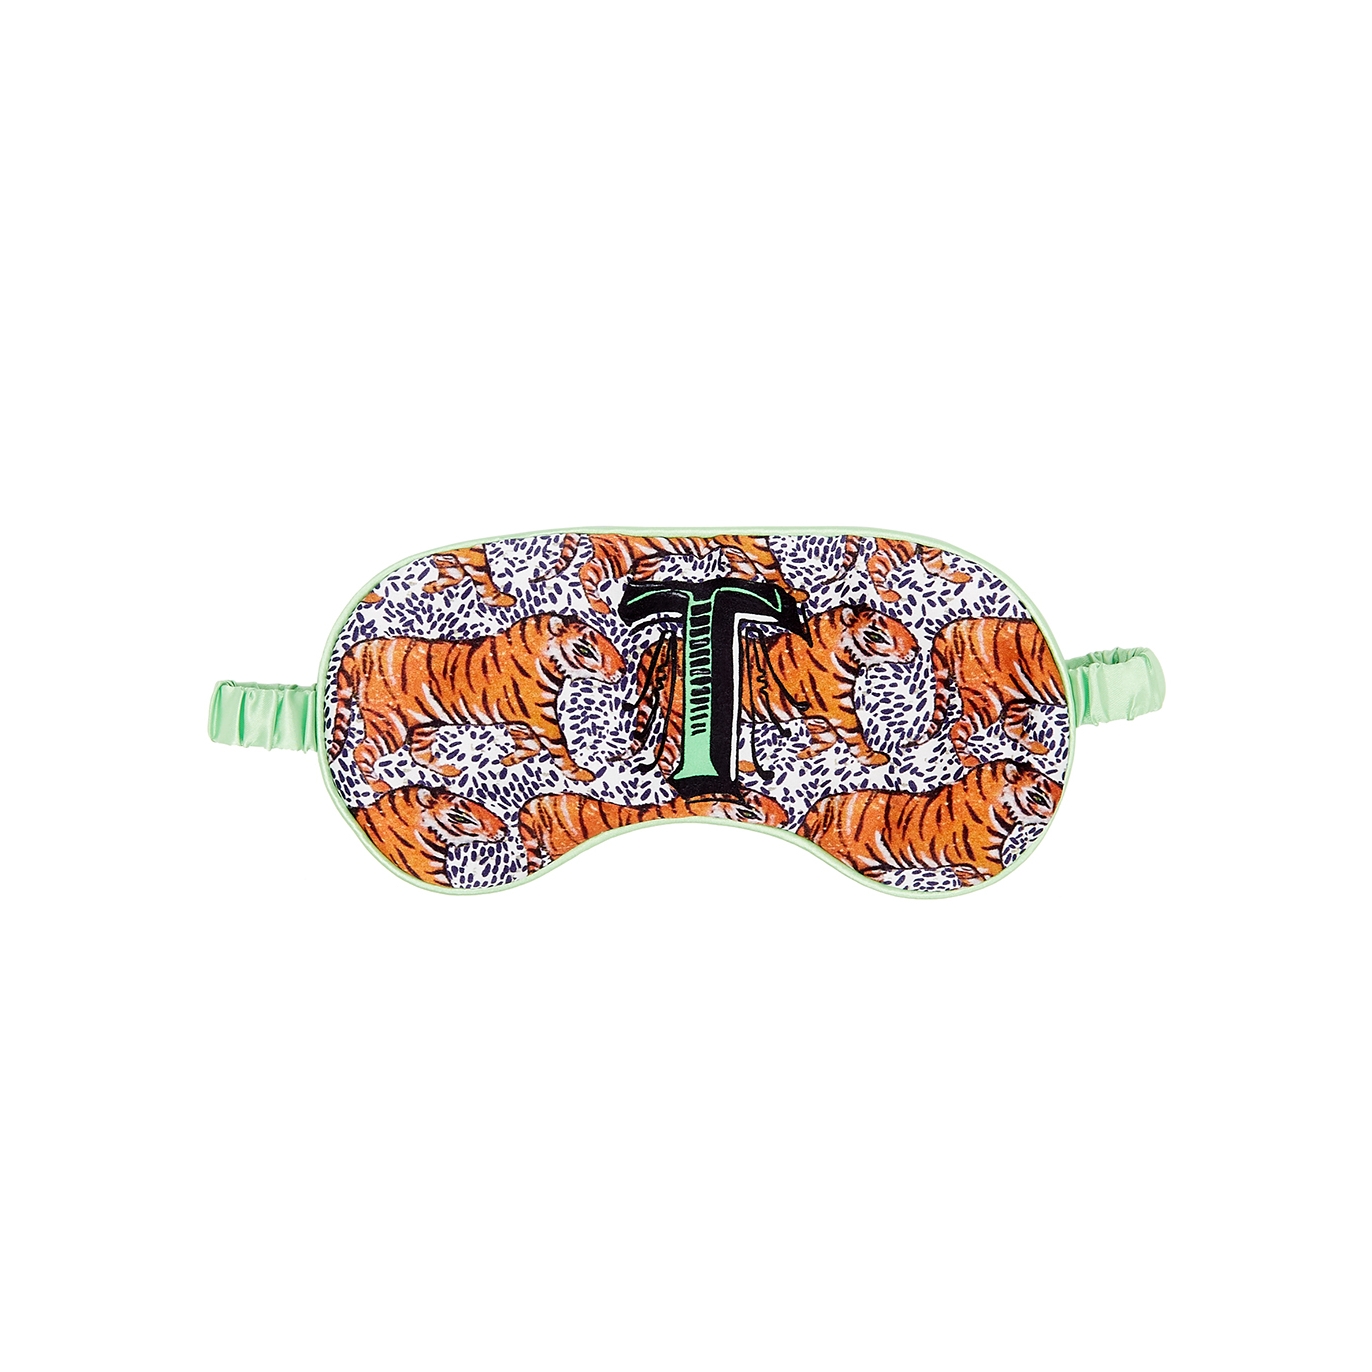 Jessica Russell Flint T Is For Tiger Silk Eye Mask